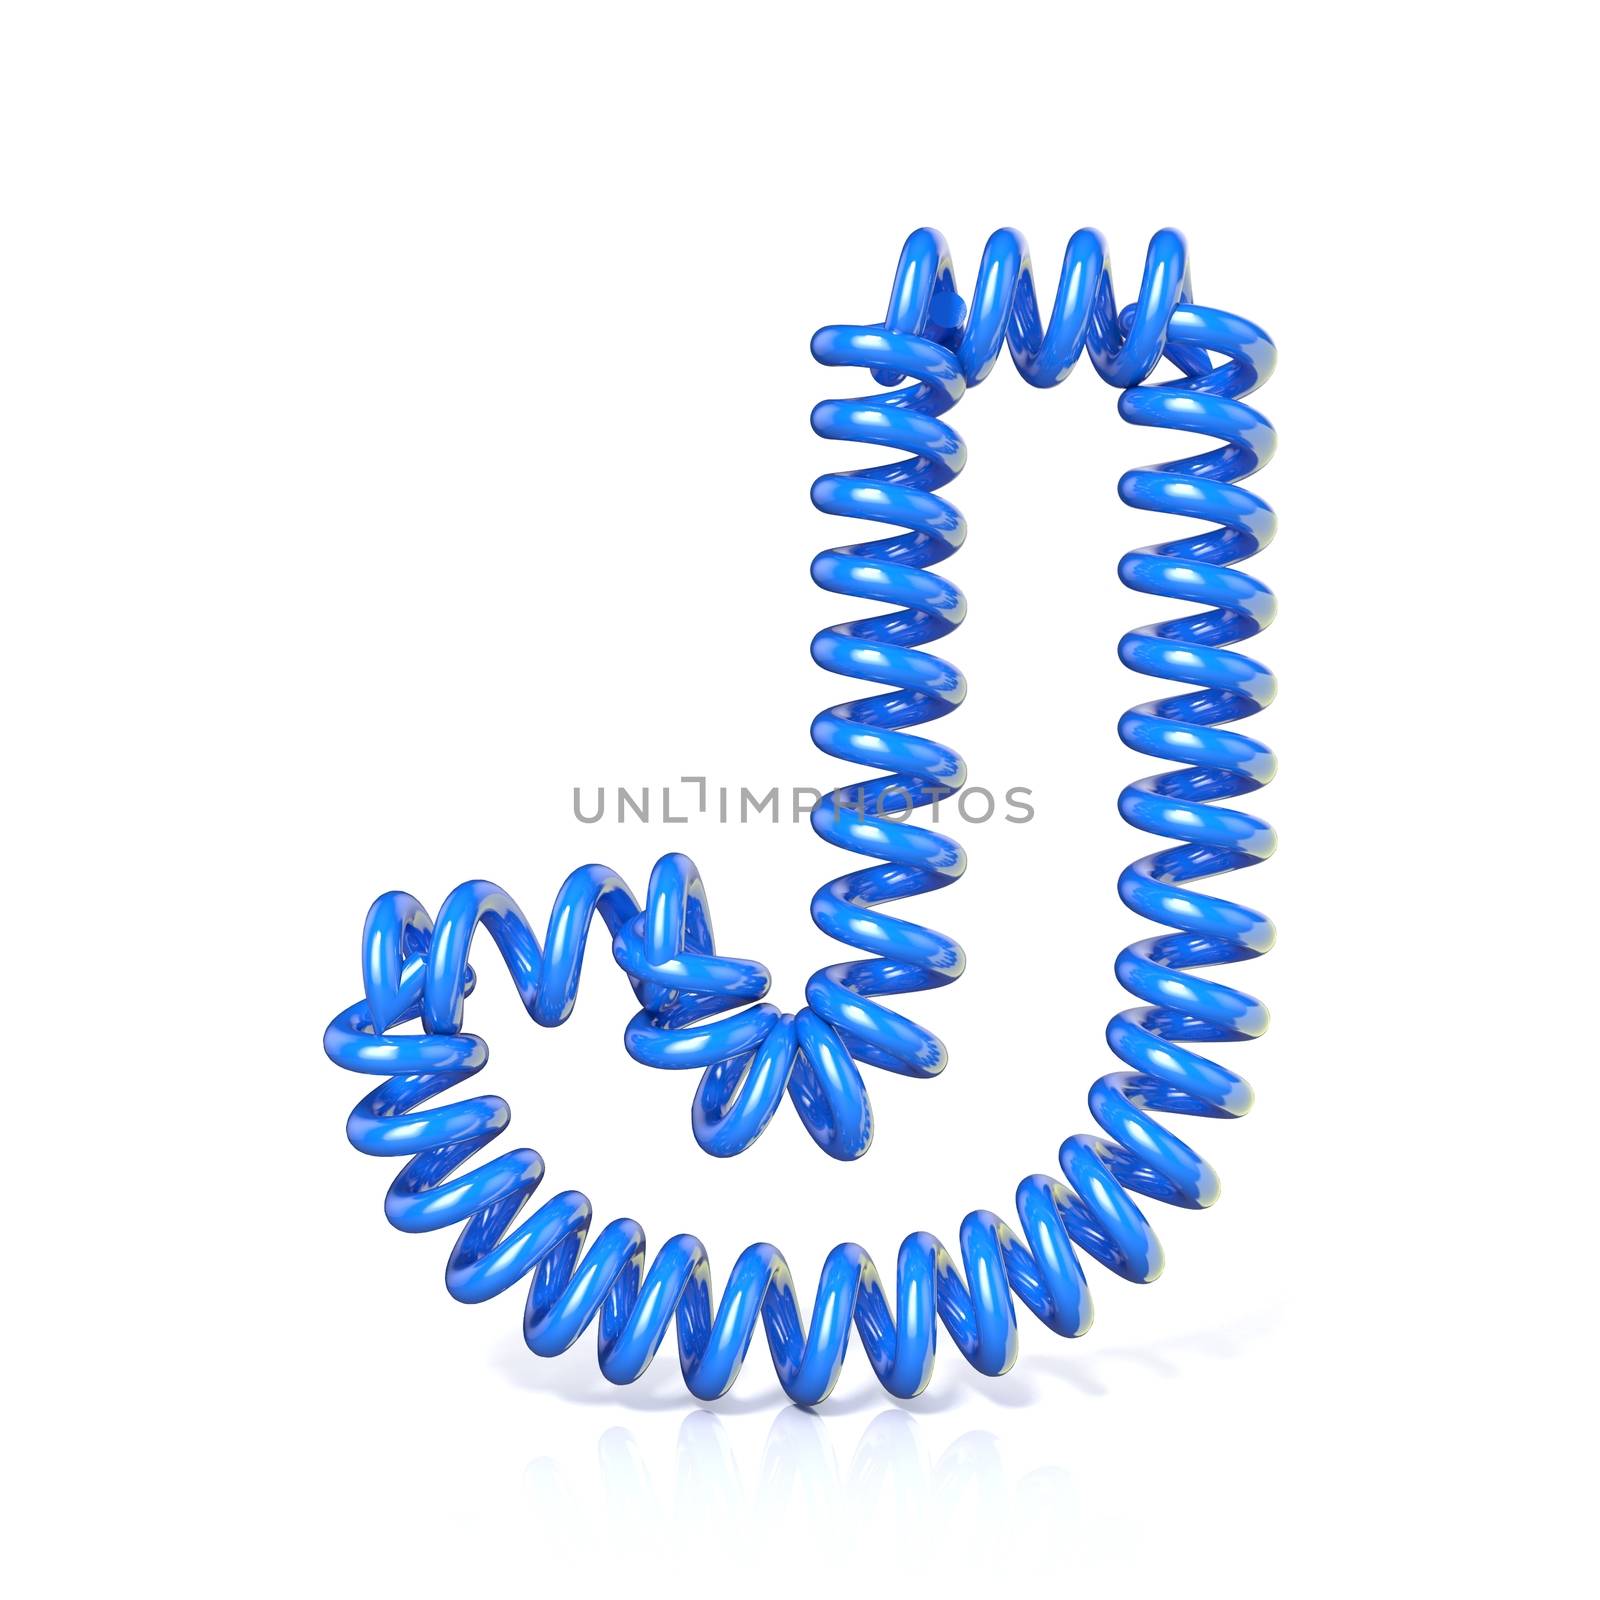 Spring, spiral cable font collection letter - J. 3D render illustration, isolated on white background